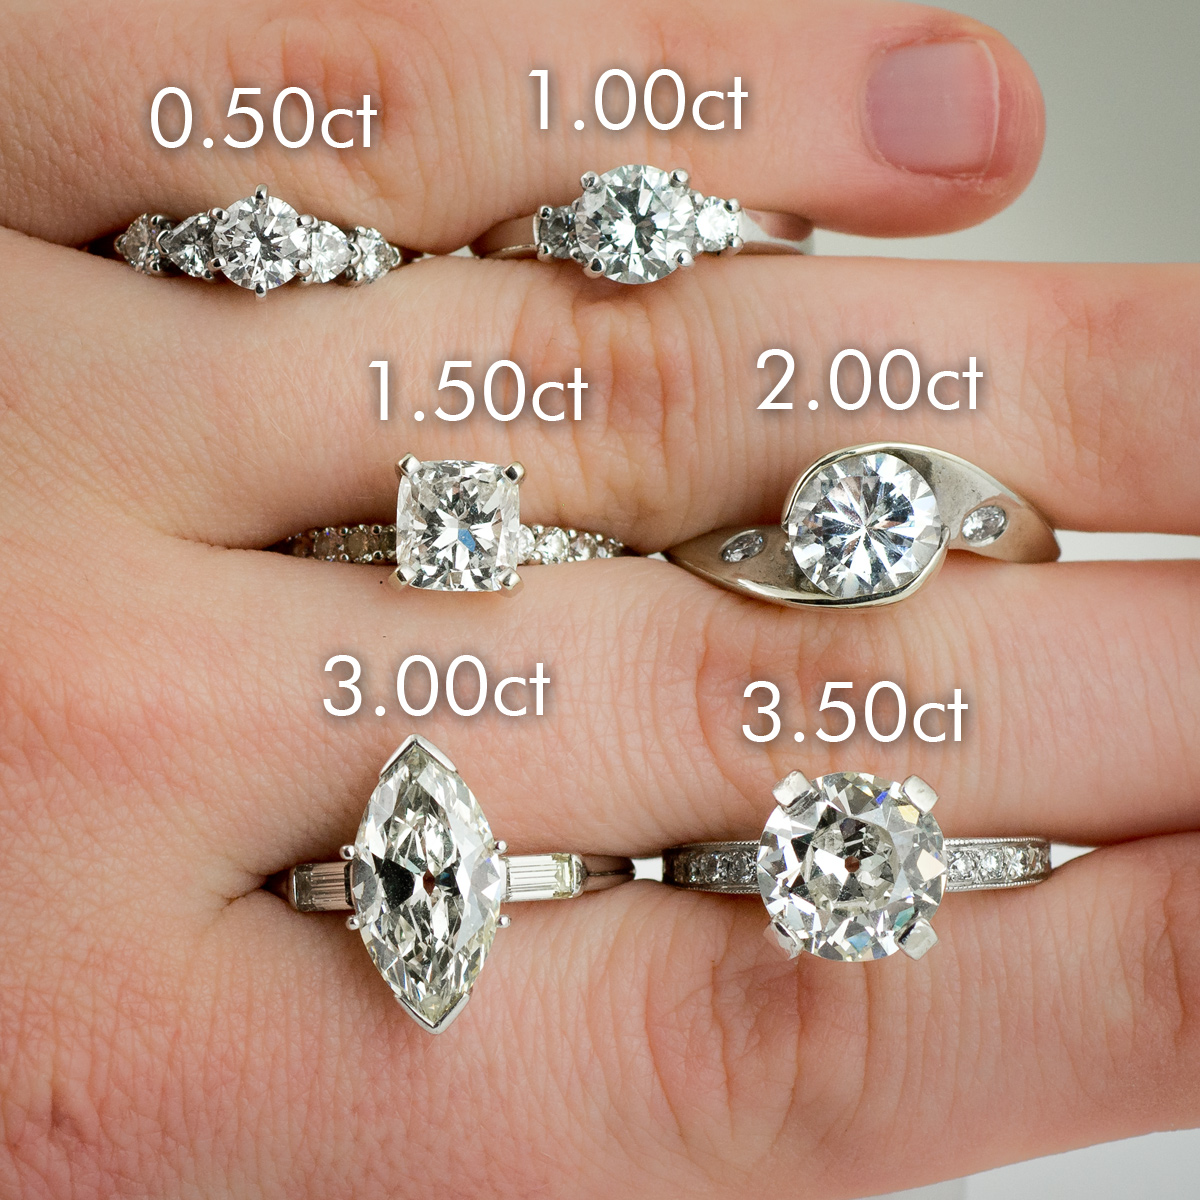 Diamond Buying Guide: the 4 C's : Learn 